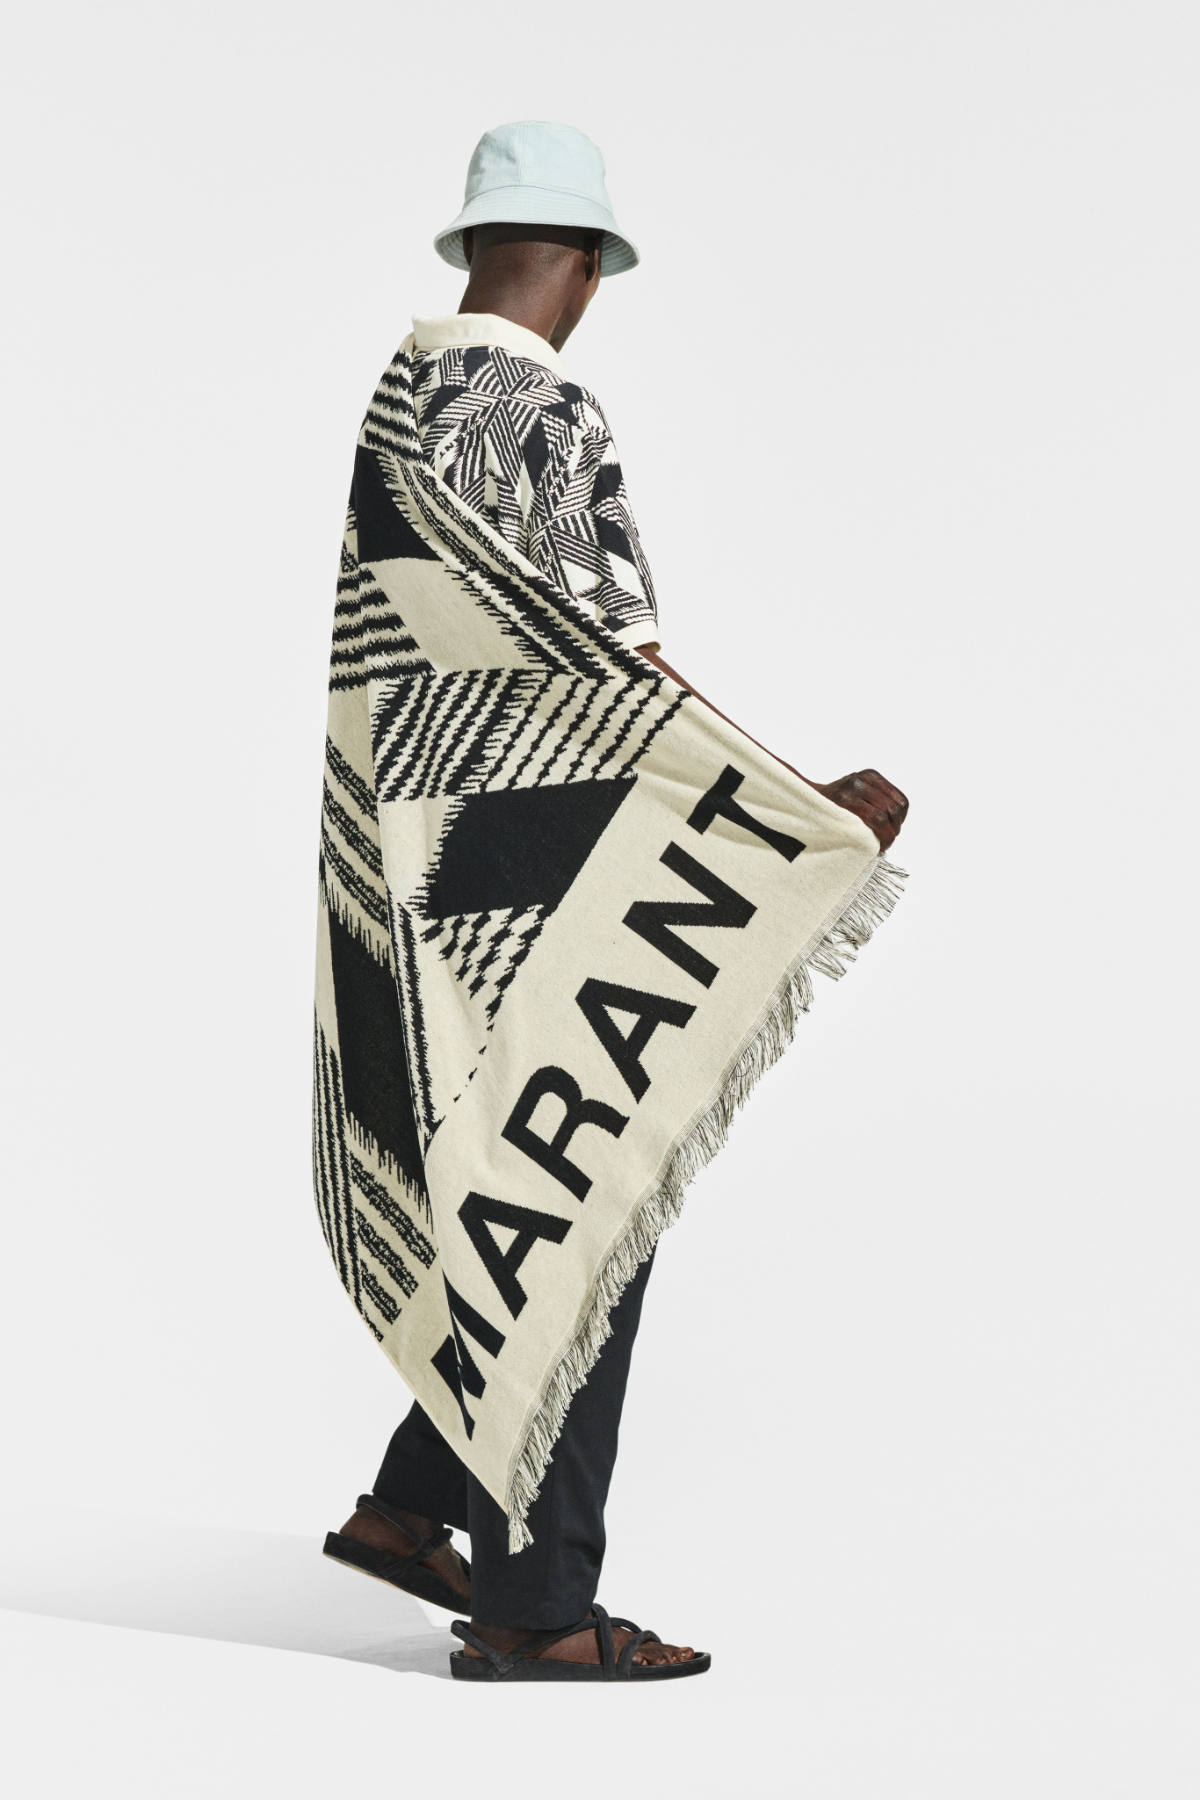 Isabel Marant Presents Its New Spring-Summer 2023 Menswear Collection